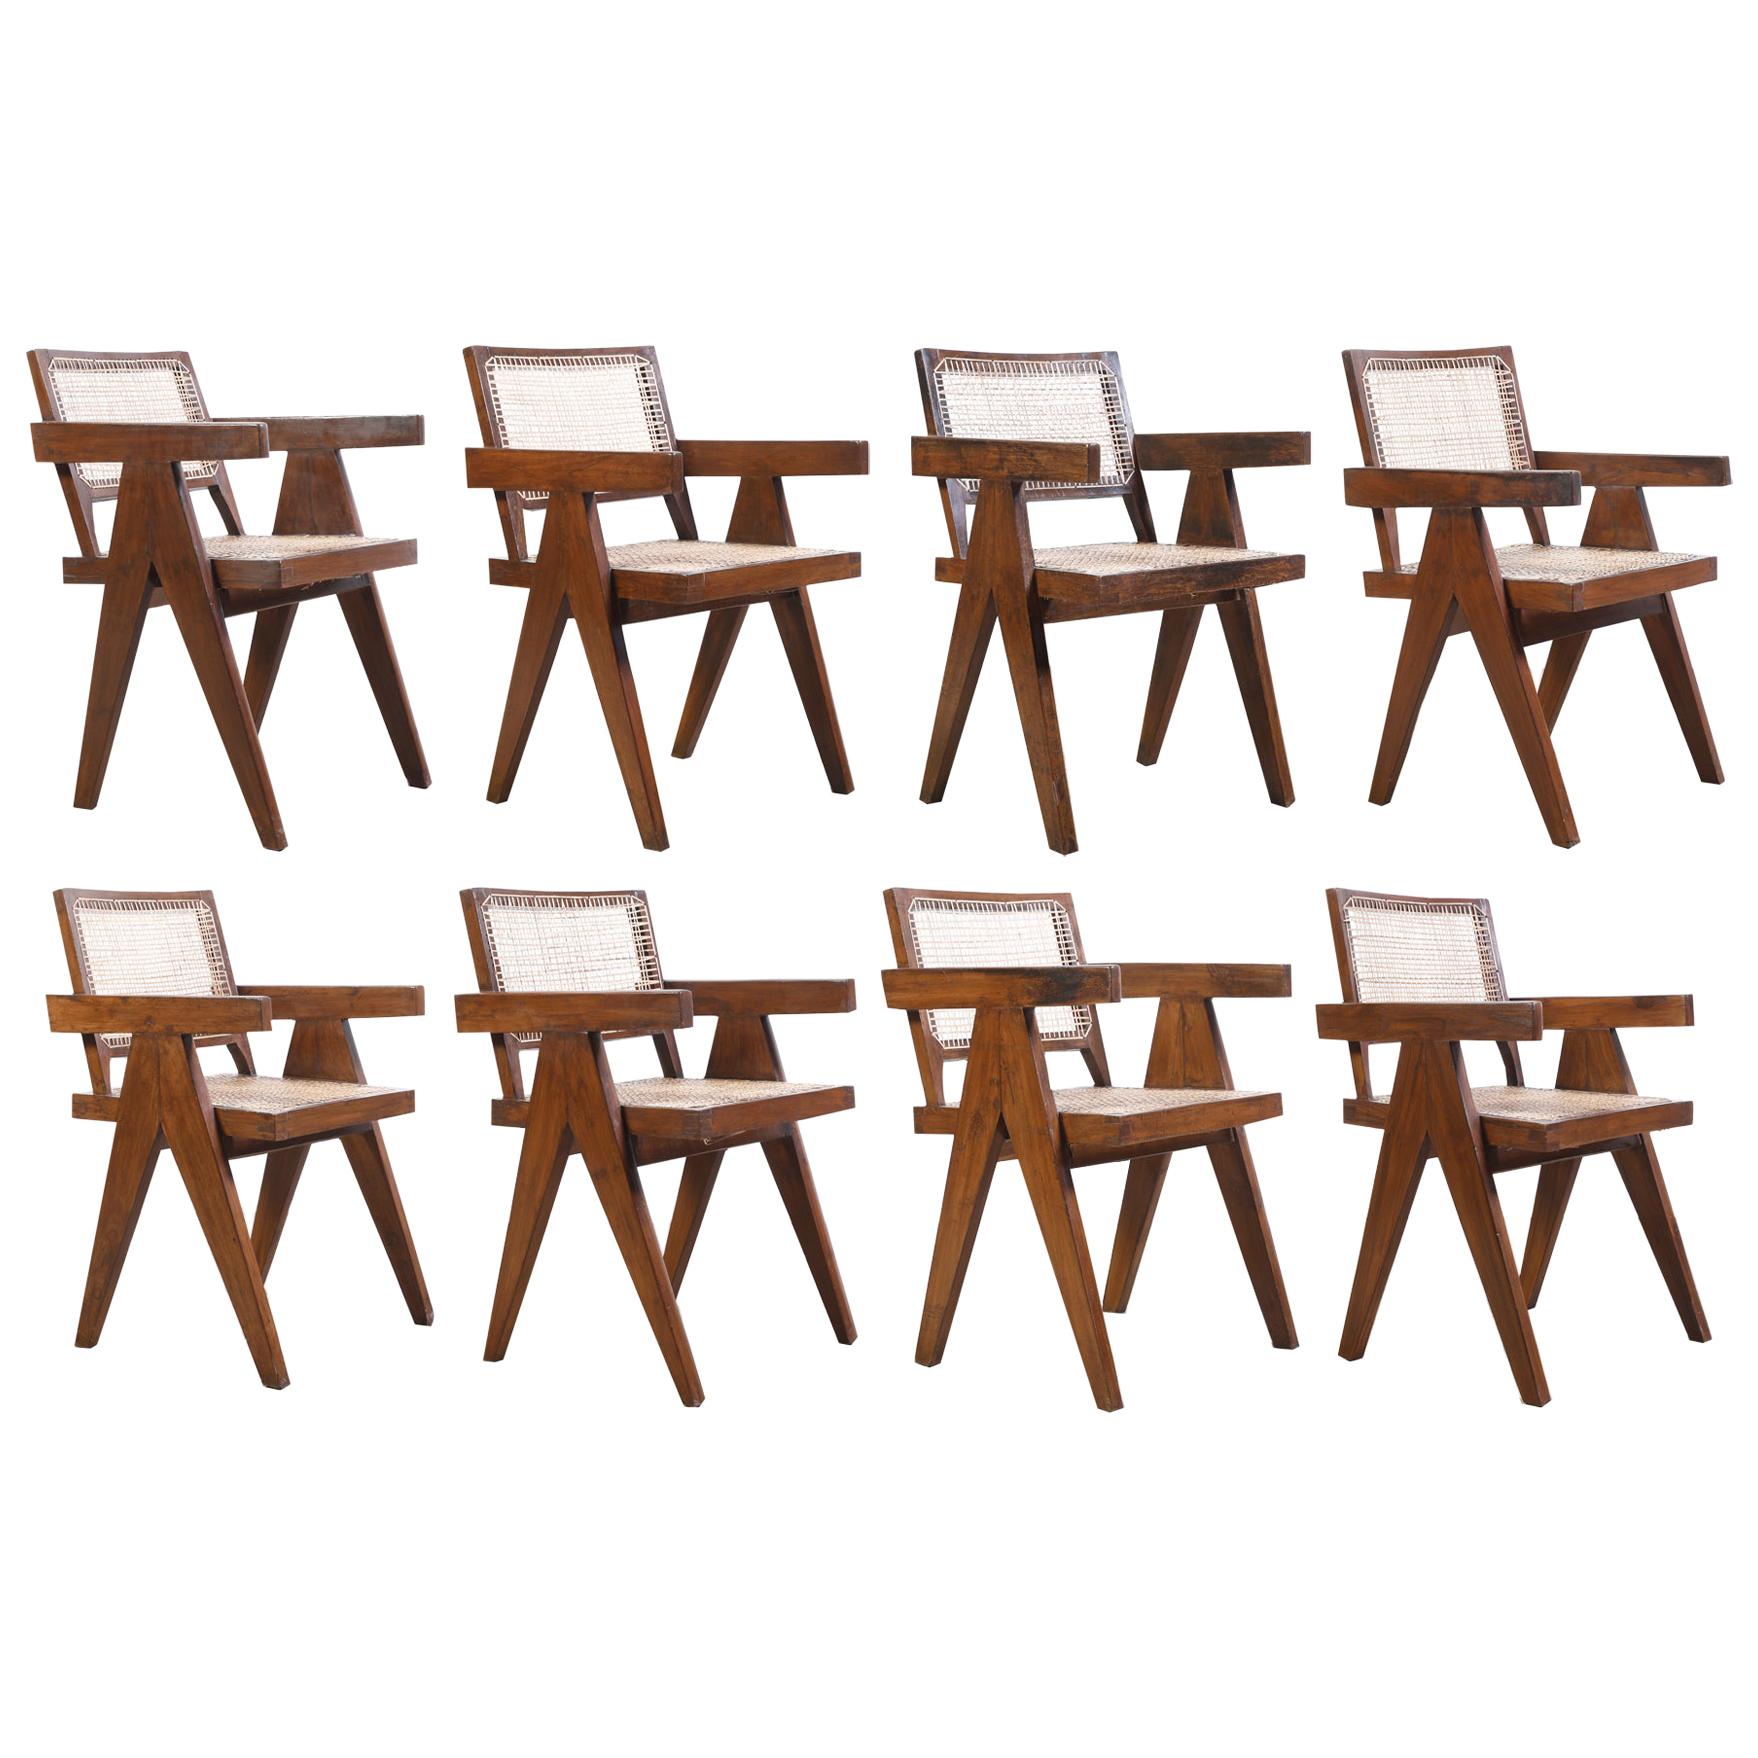 Pierre Jeanneret Set of 8 Chairs / Authentic Mid-Century Modern PJ-SI-28-B